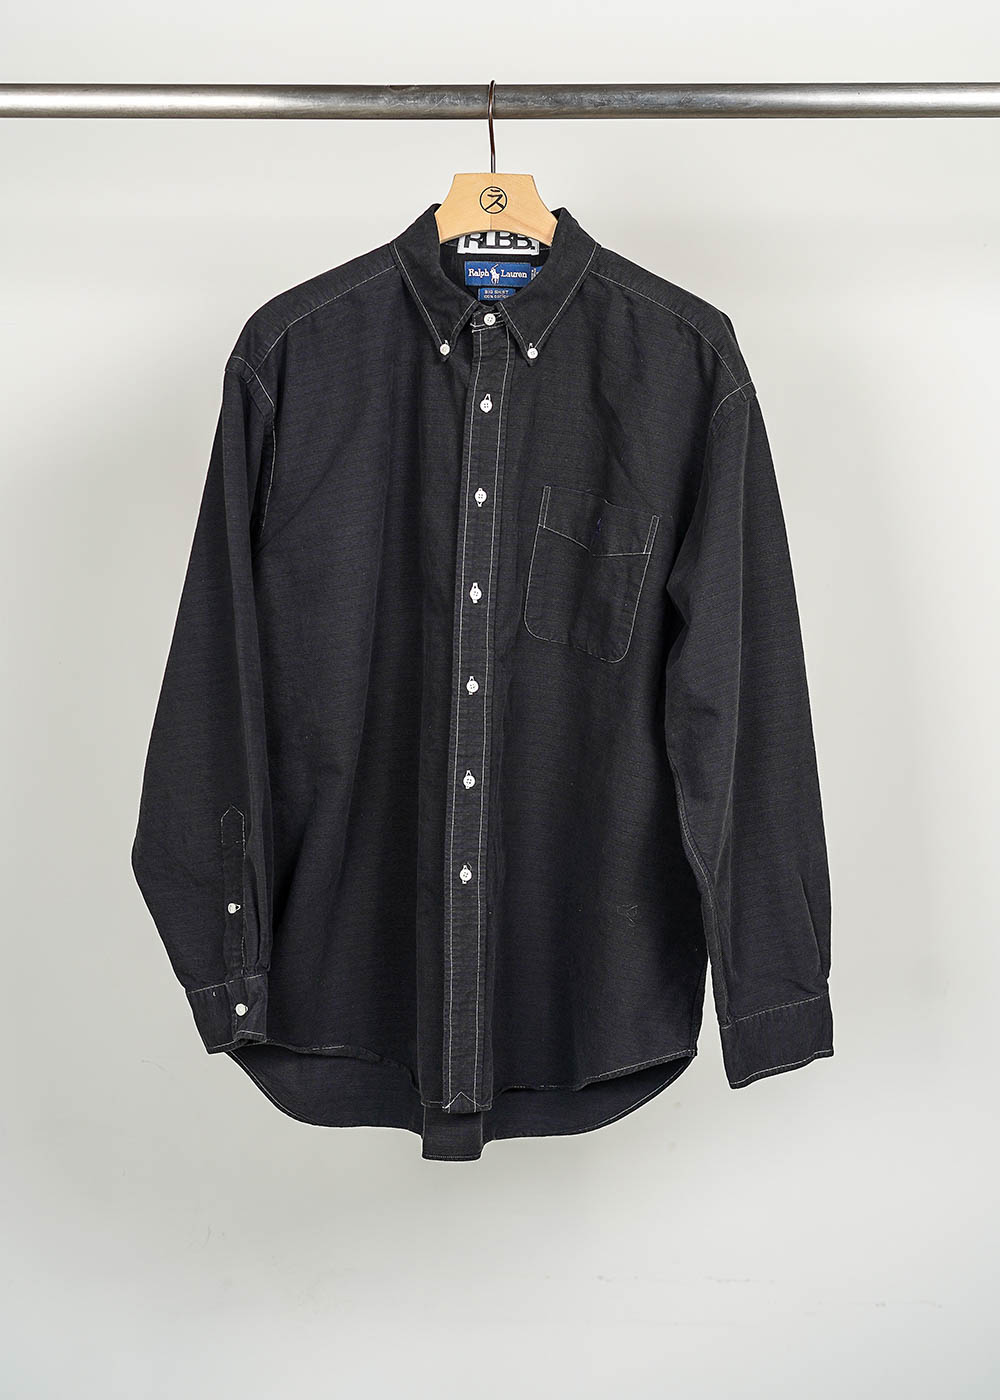 reproduction 164 / PRL Big Shirts (Overdyed)